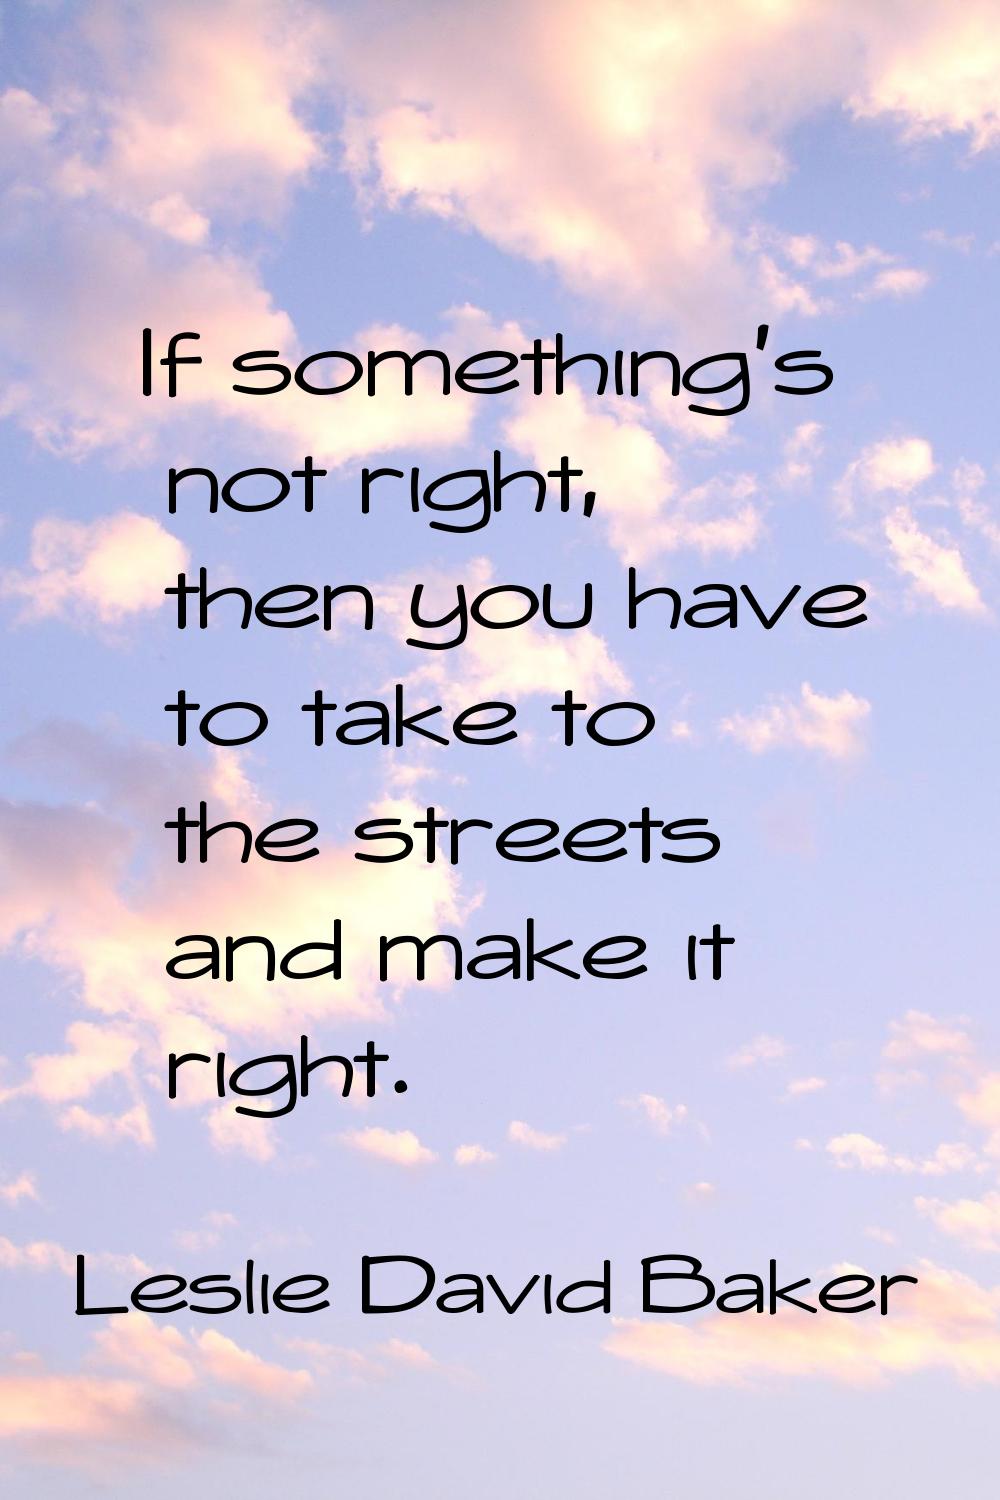 If something's not right, then you have to take to the streets and make it right.